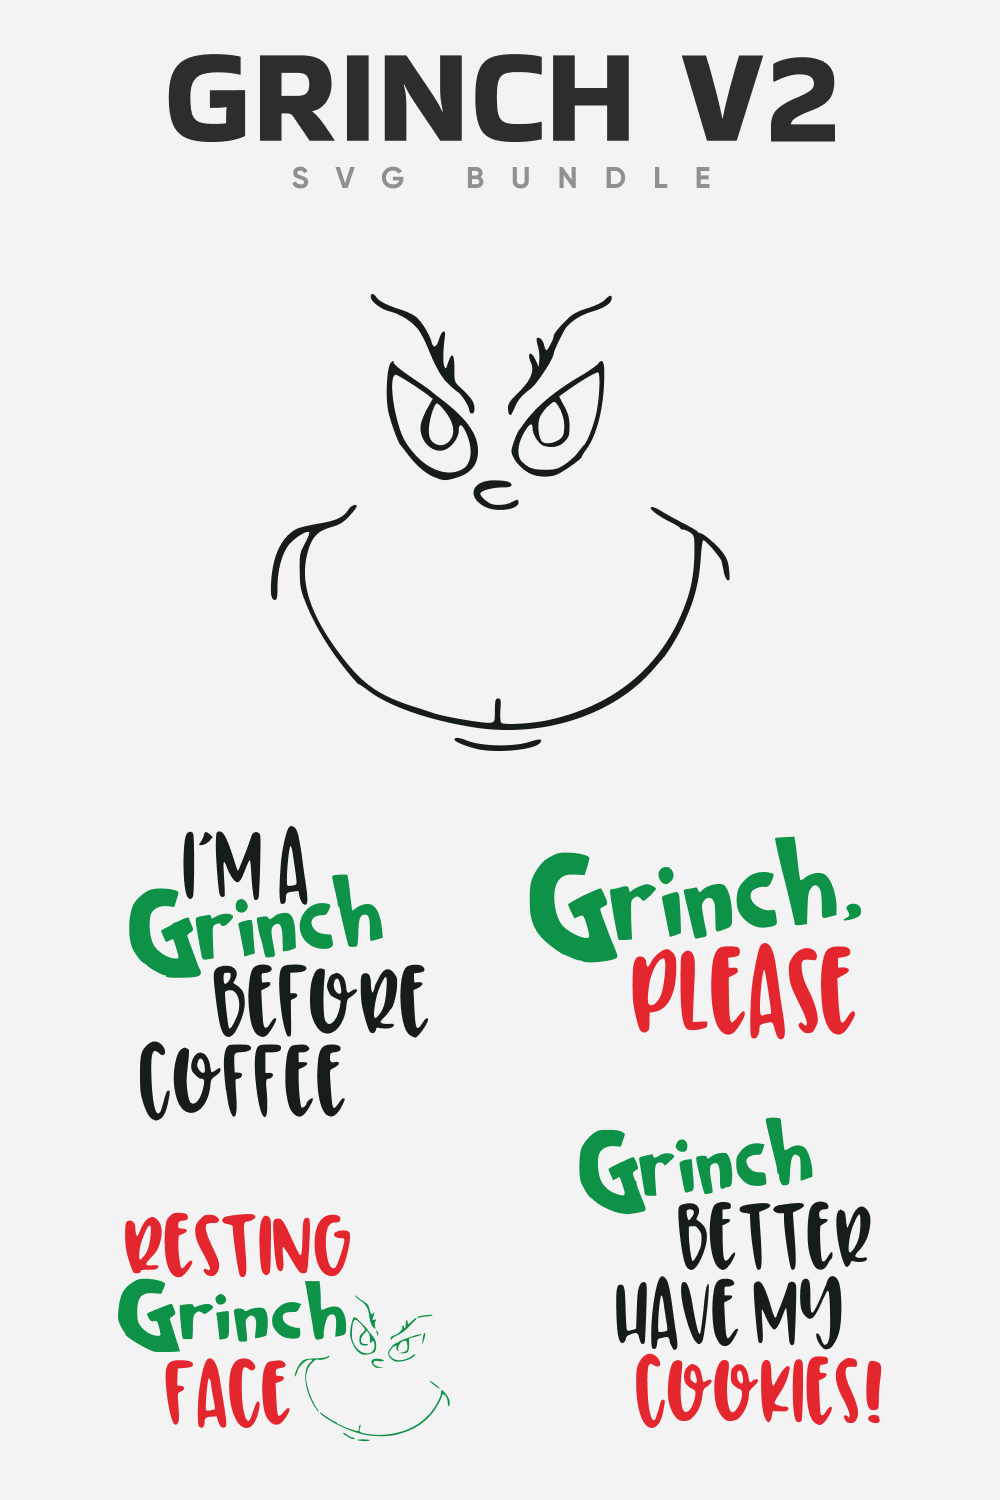 Resting Grinch Face with Different Inscription.